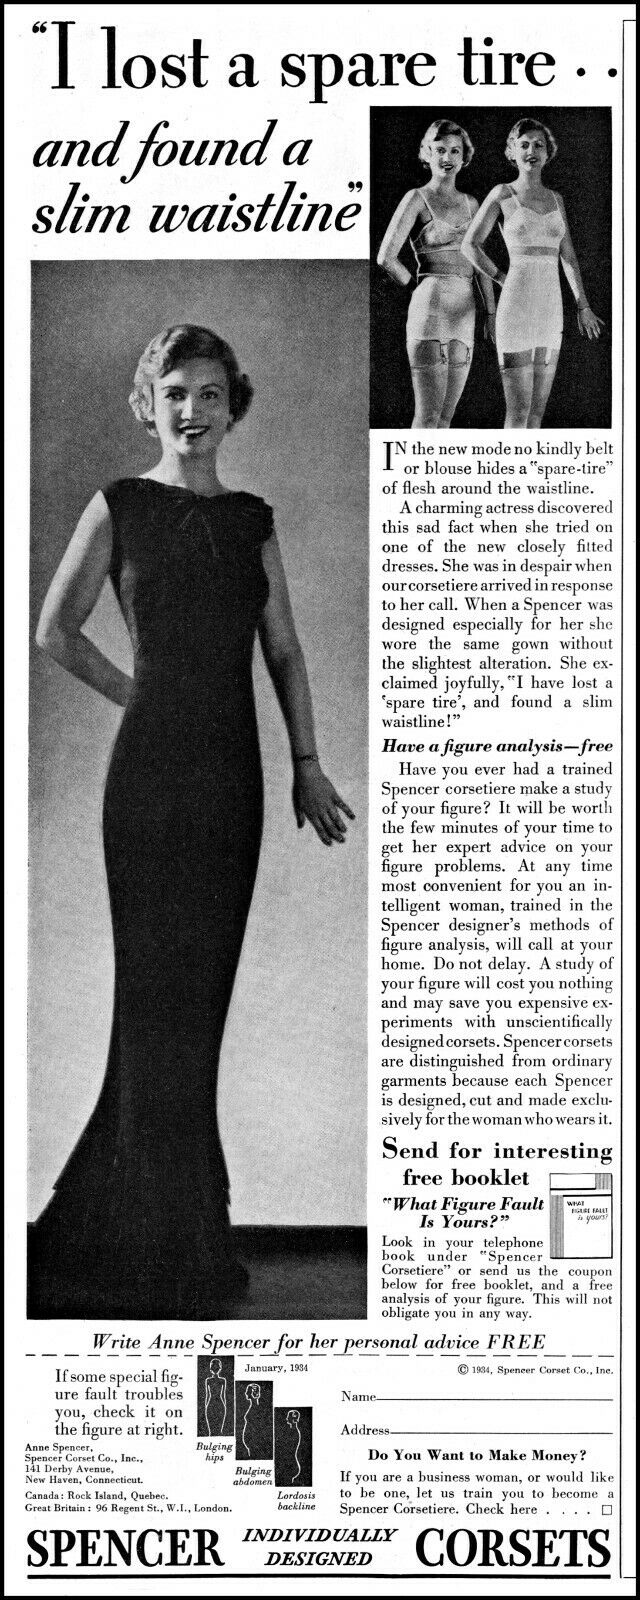 1934 Woman Model Spencer Corsets Lose A Spare Tire Vintage Photo Print Ad L84